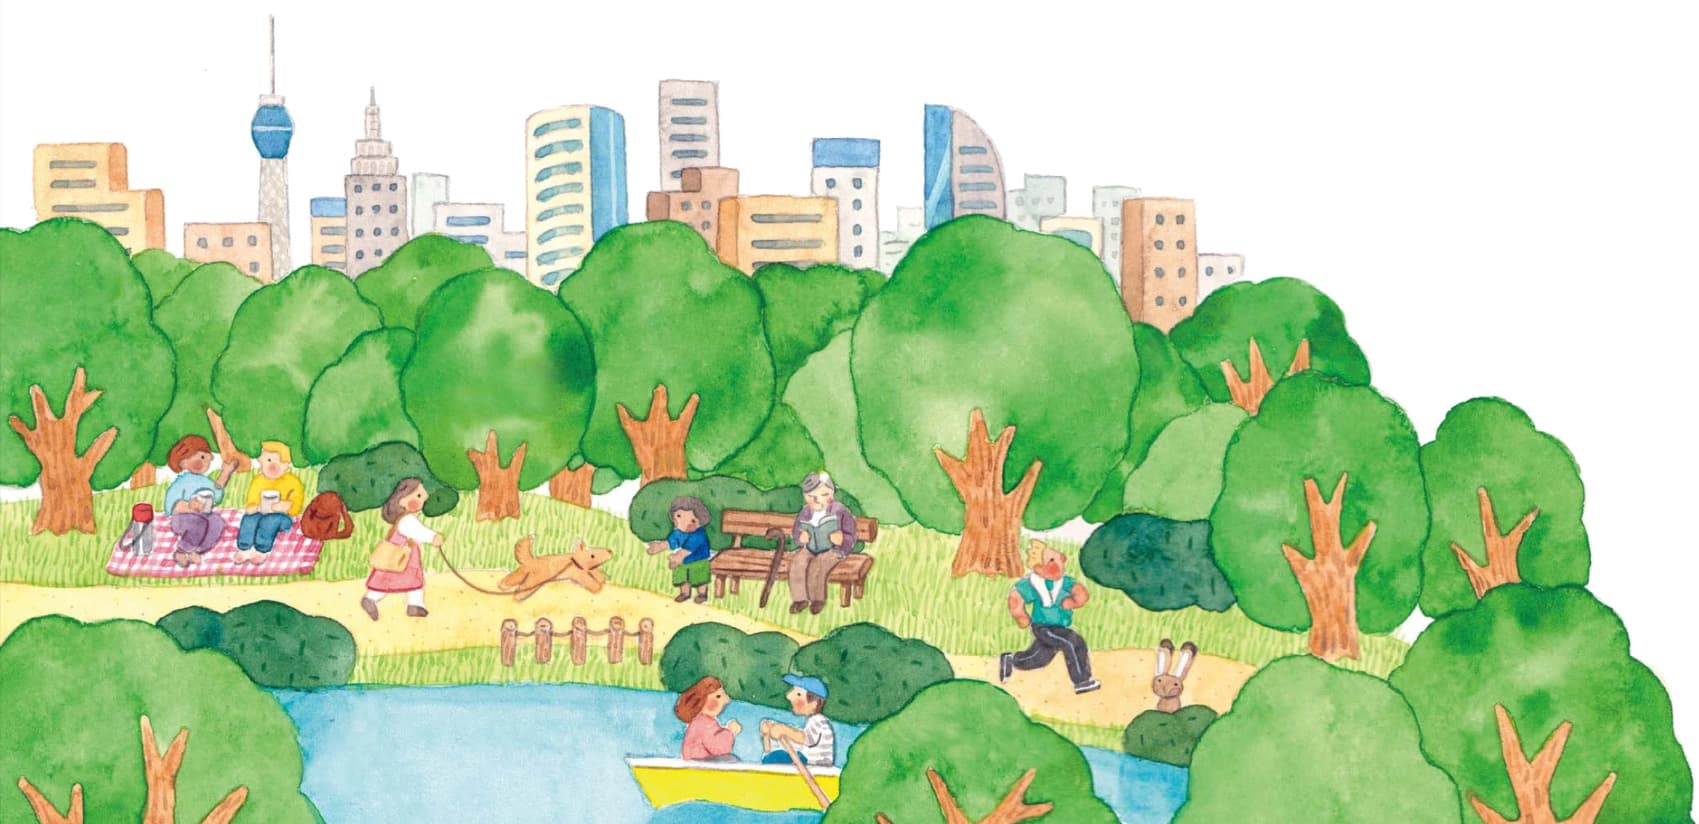 Illustration of a green city